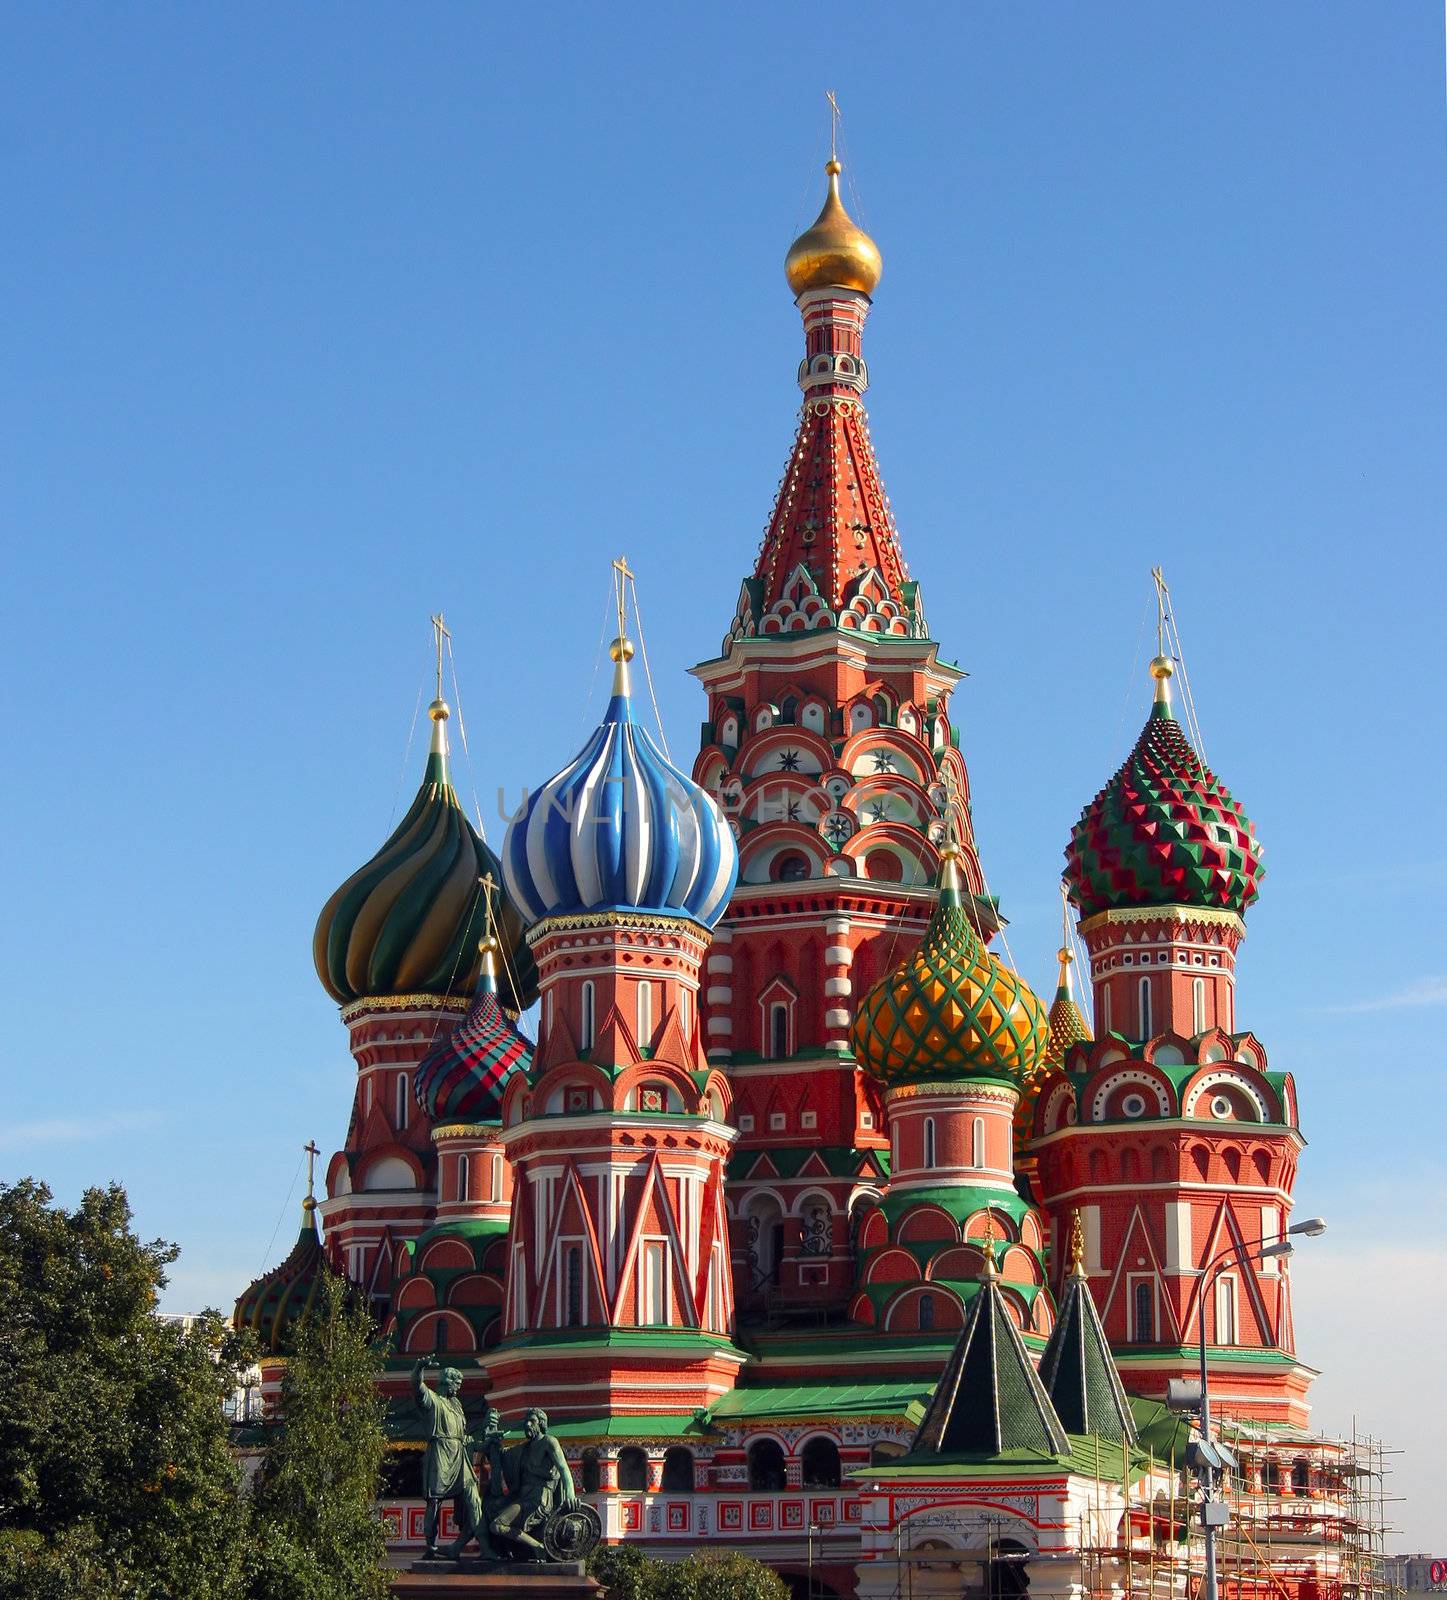 St. Basil cathedral in the Kremlin square in the main part of Moscow Russia.